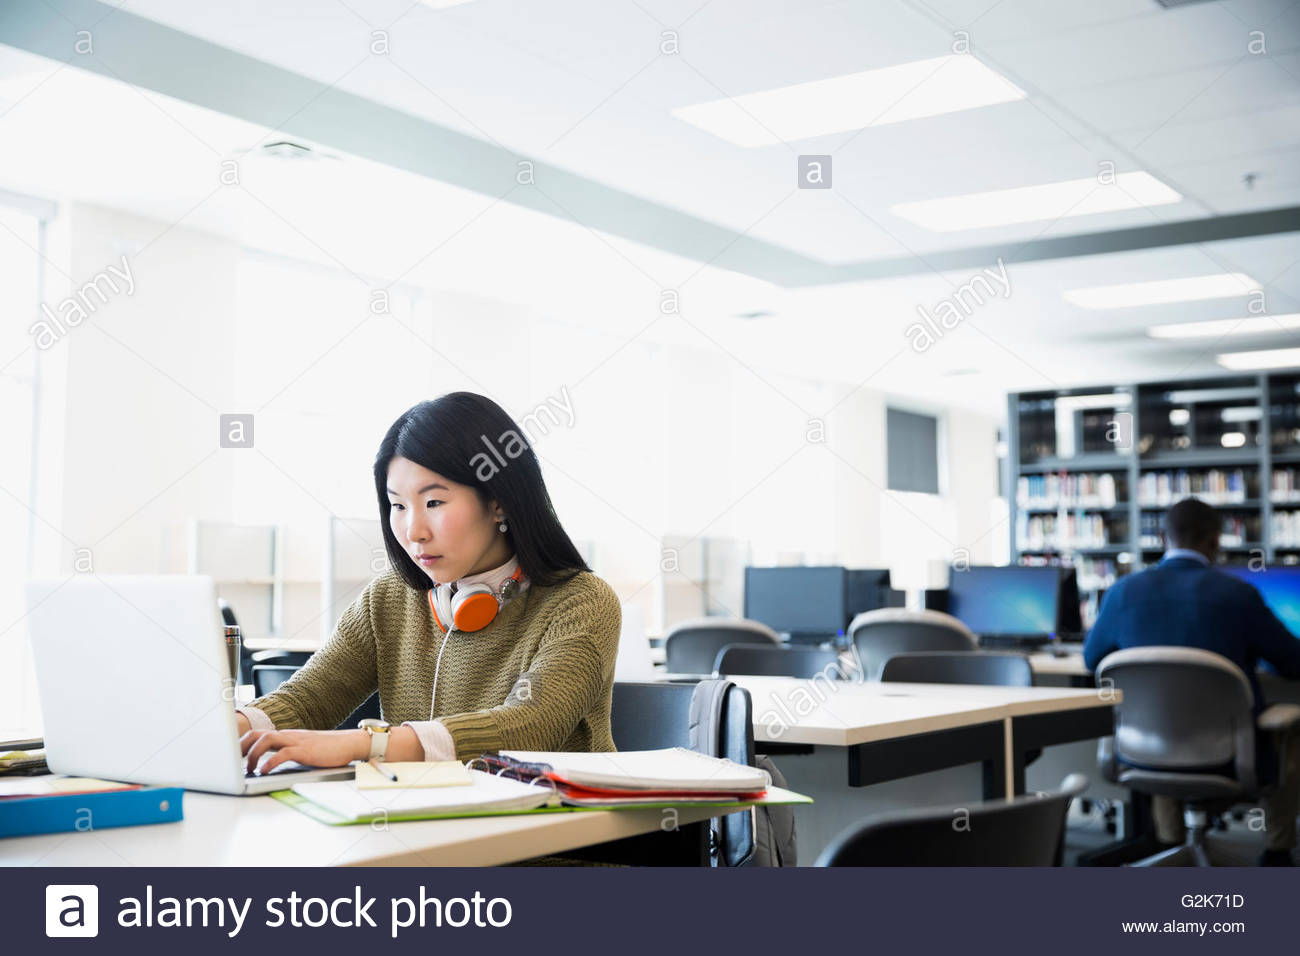 College student with headphones researching at laptop in library Stock Photo